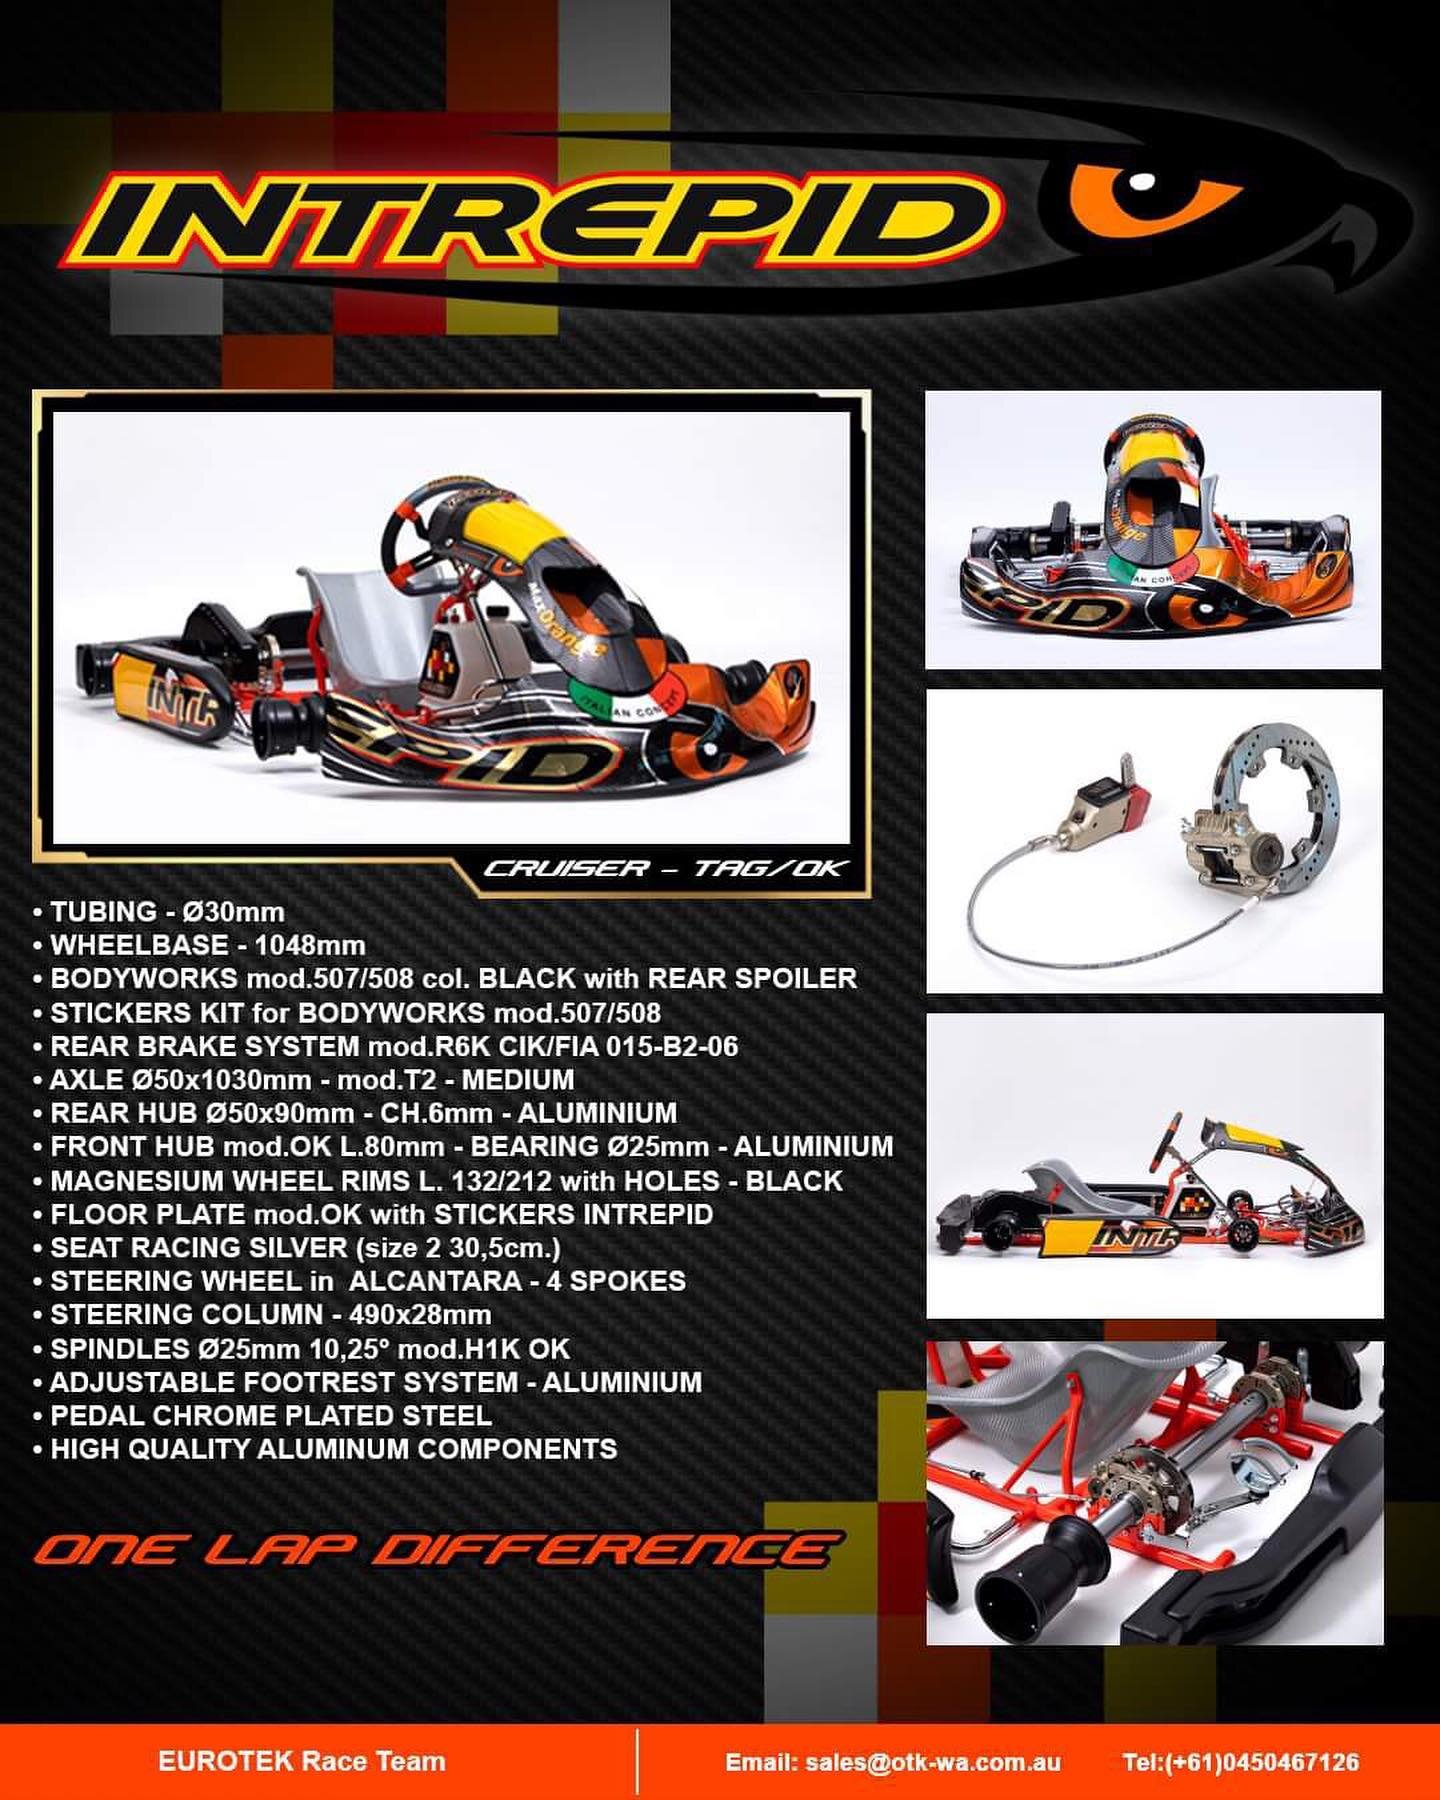 Intrepid Cruiser MS3 suitable for all Direct Drive classes including TAG, KA3, KA2 available for Nationwide delivery for $6,595.00 inc. GST

Order online at www.eurotek.racing via e-mail or give us a call on 0450 467 126.